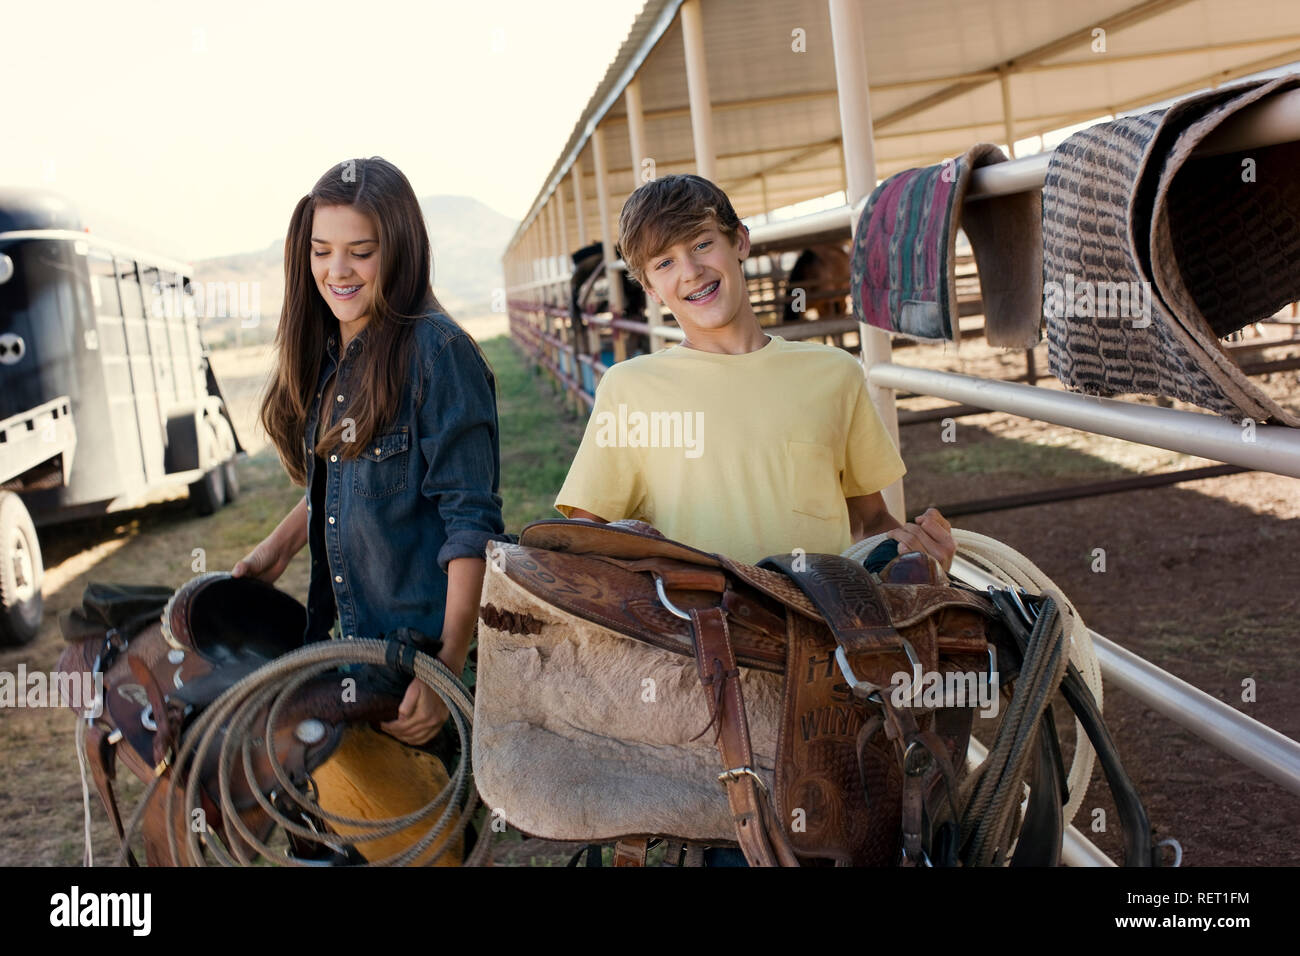 Portrait of two smiling teenagers holding horse riding saddles. Stock Photo